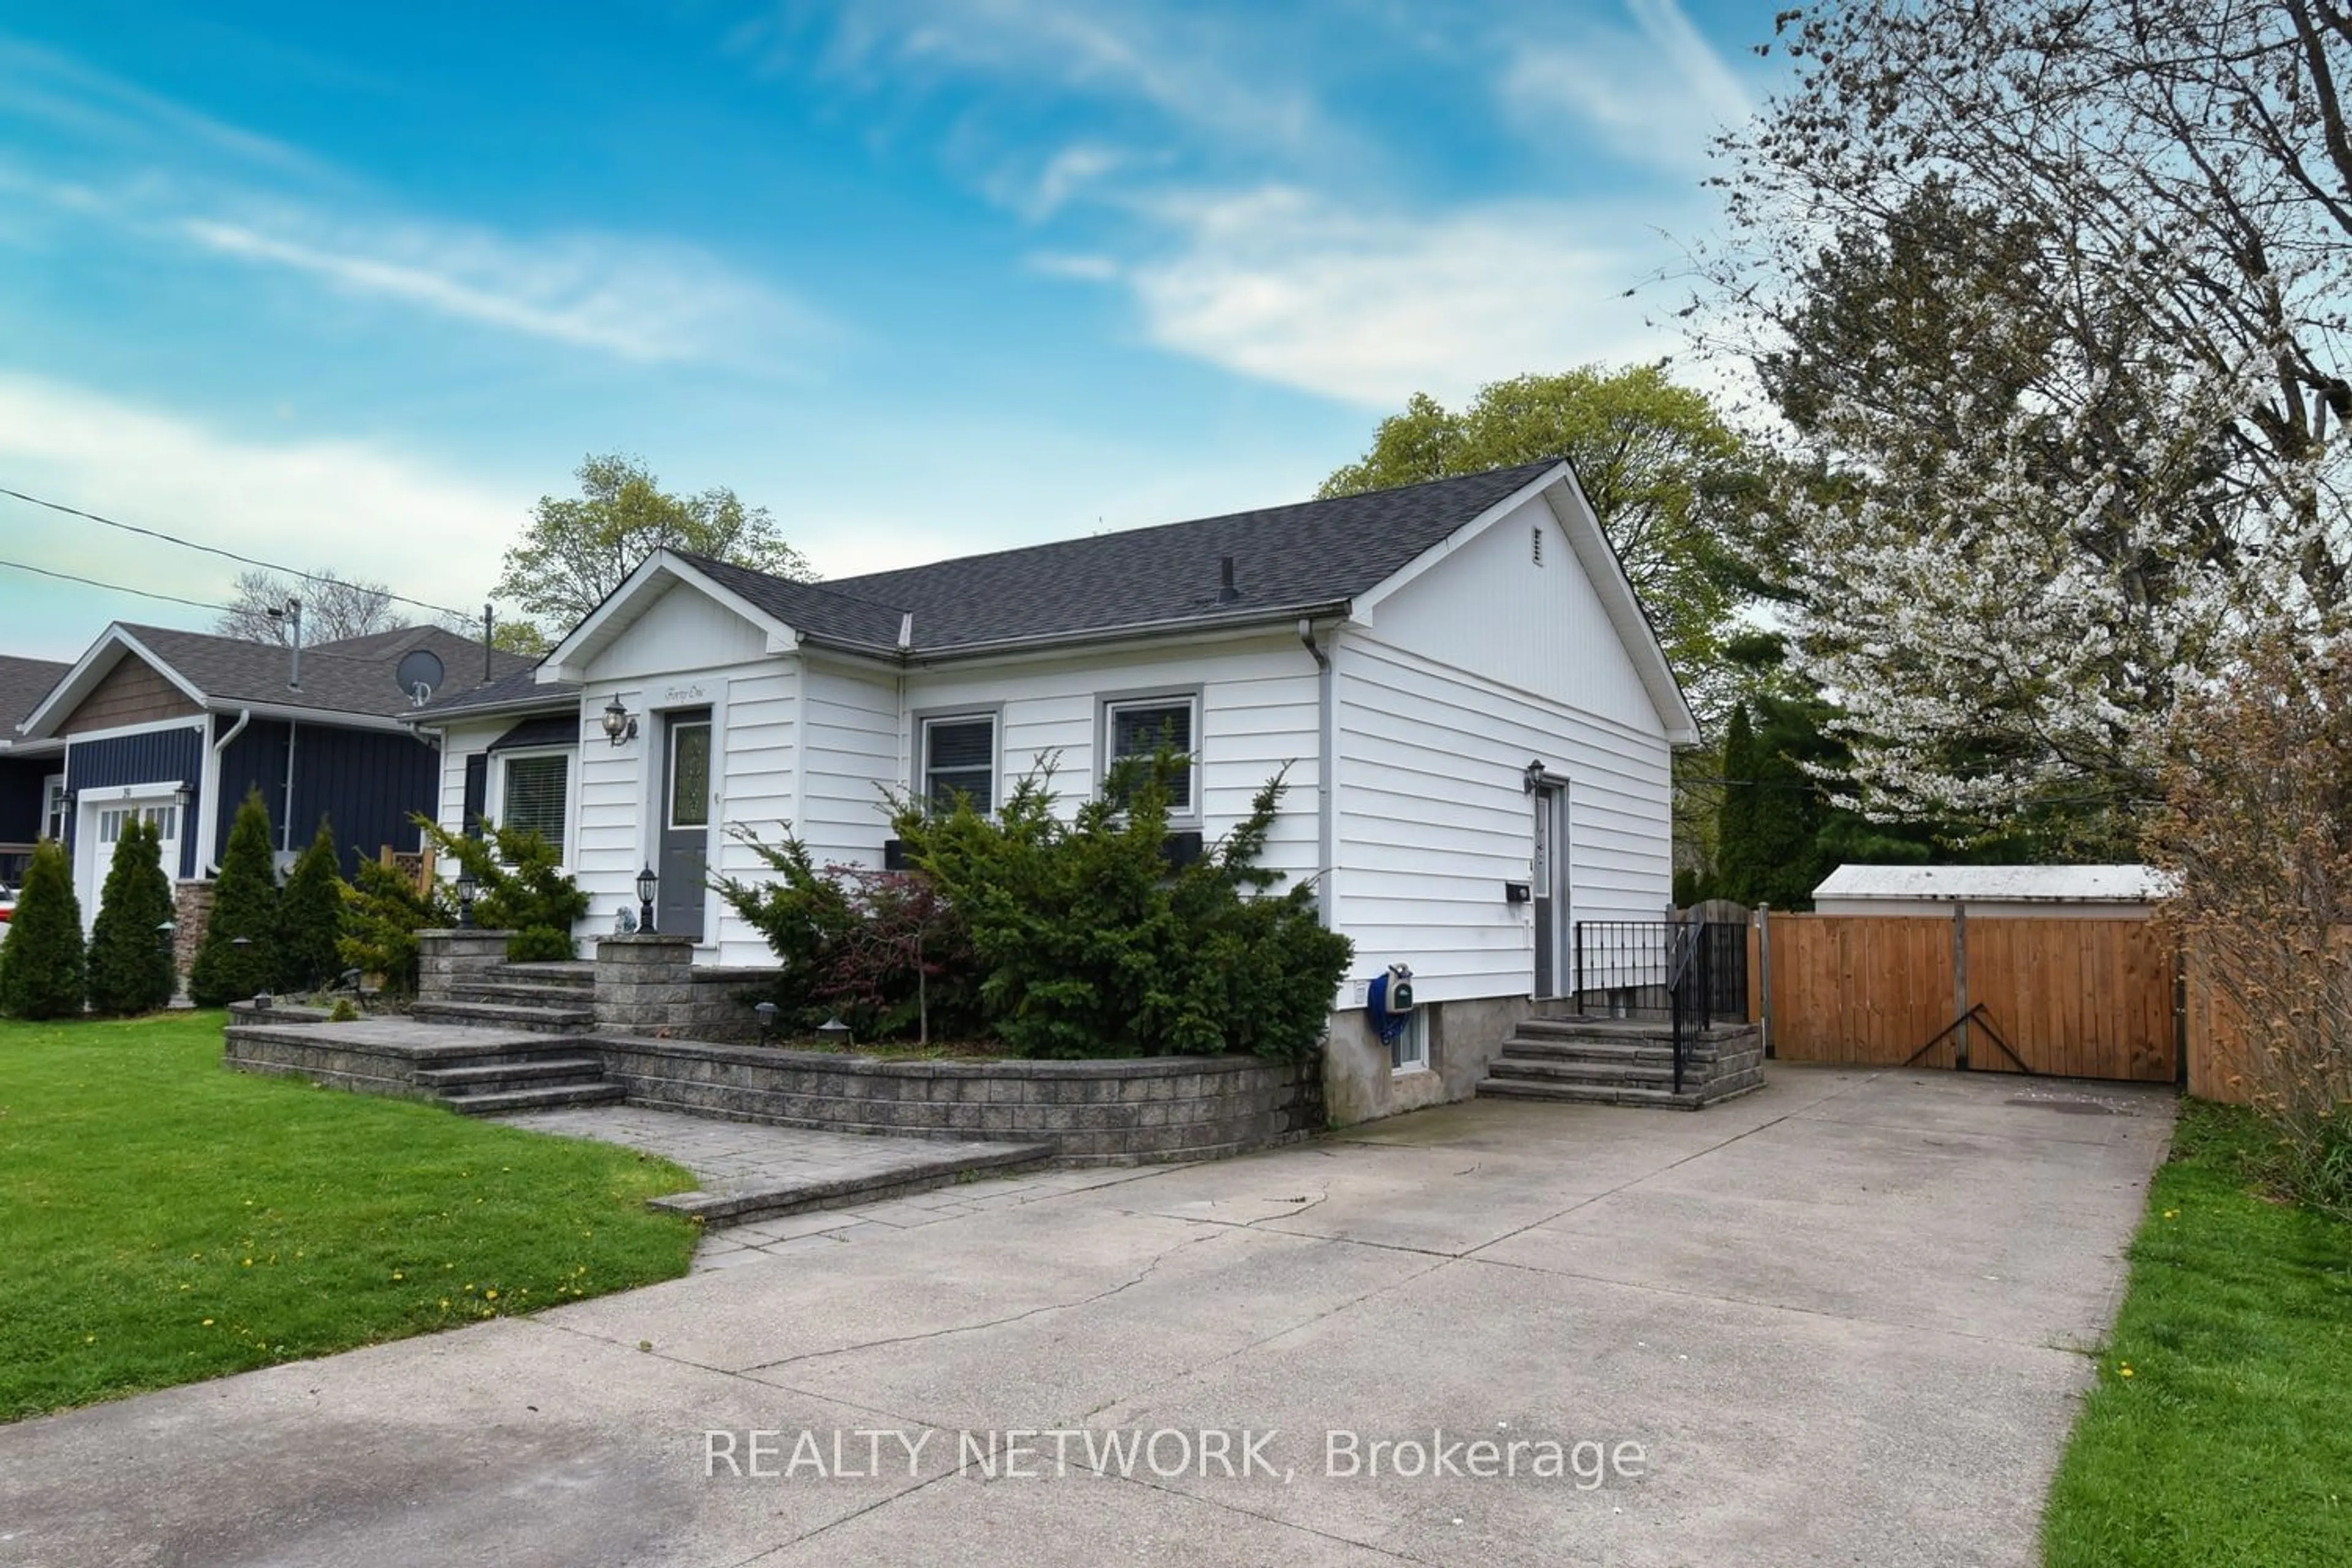 Frontside or backside of a home for 41 Woodbine Ave, St. Catharines Ontario L2N 3N5